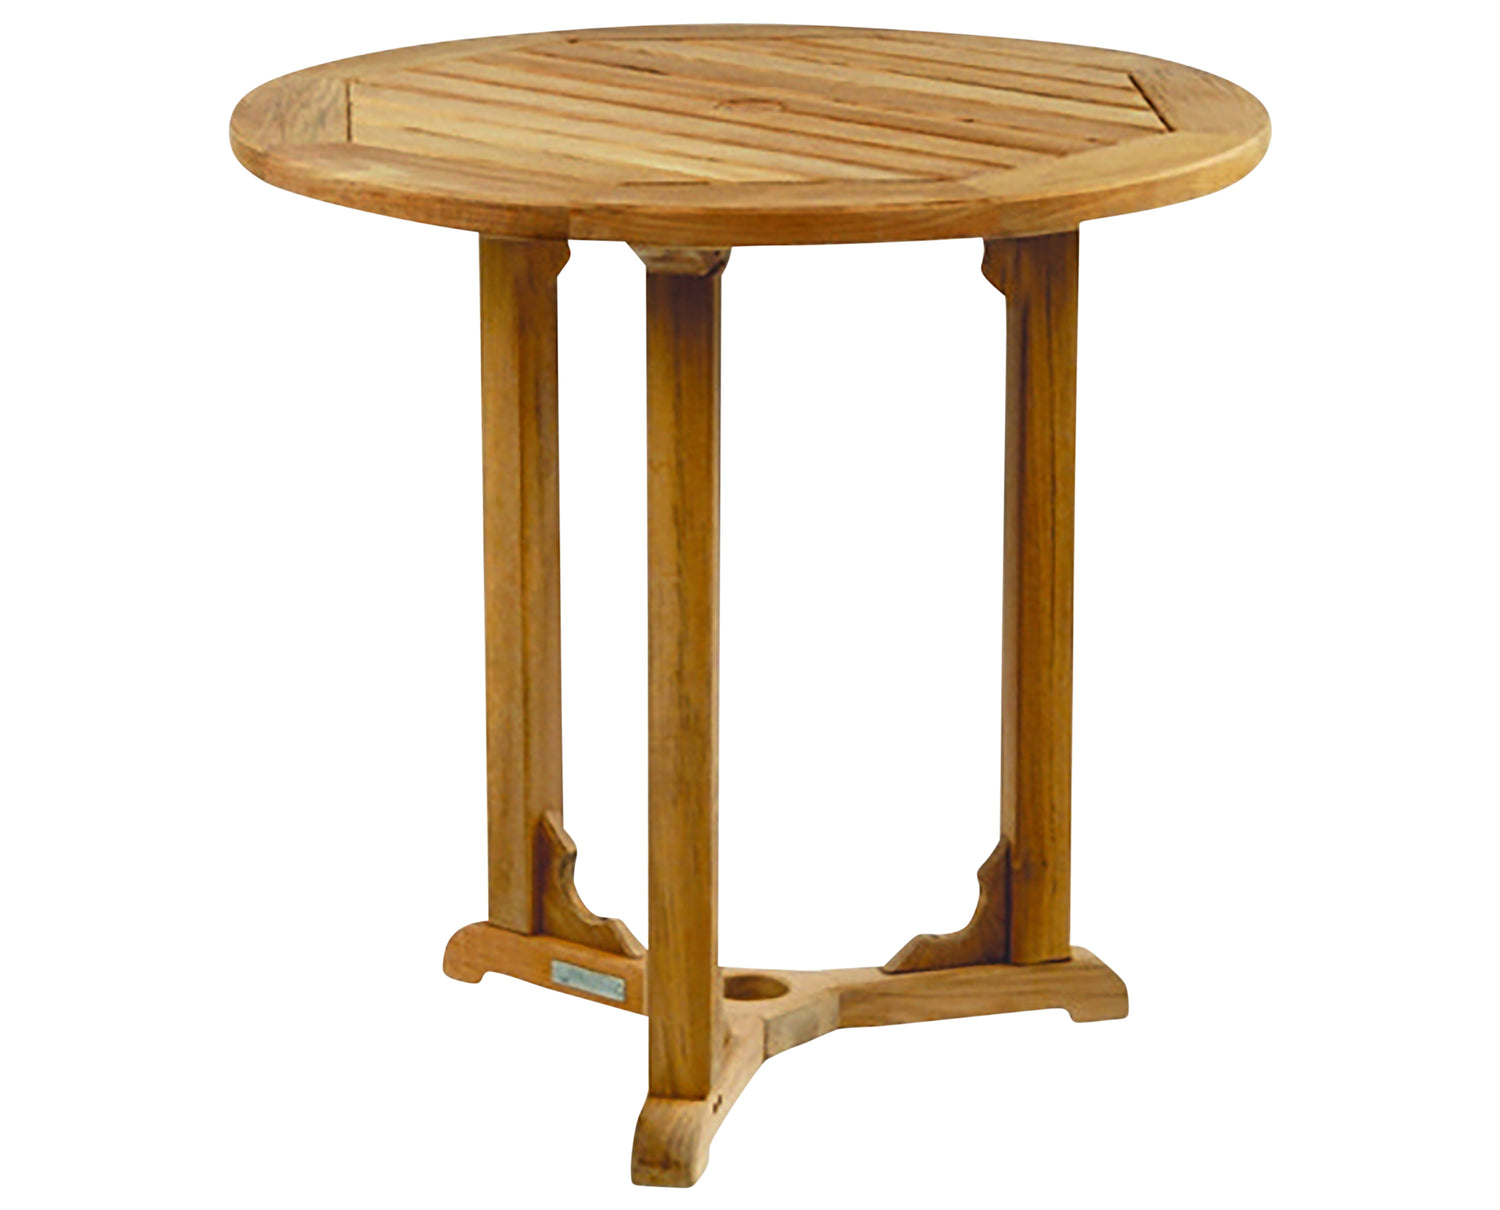 Bistro Table | Kingsley Bate Essex Collection | Valley Ridge Furniture